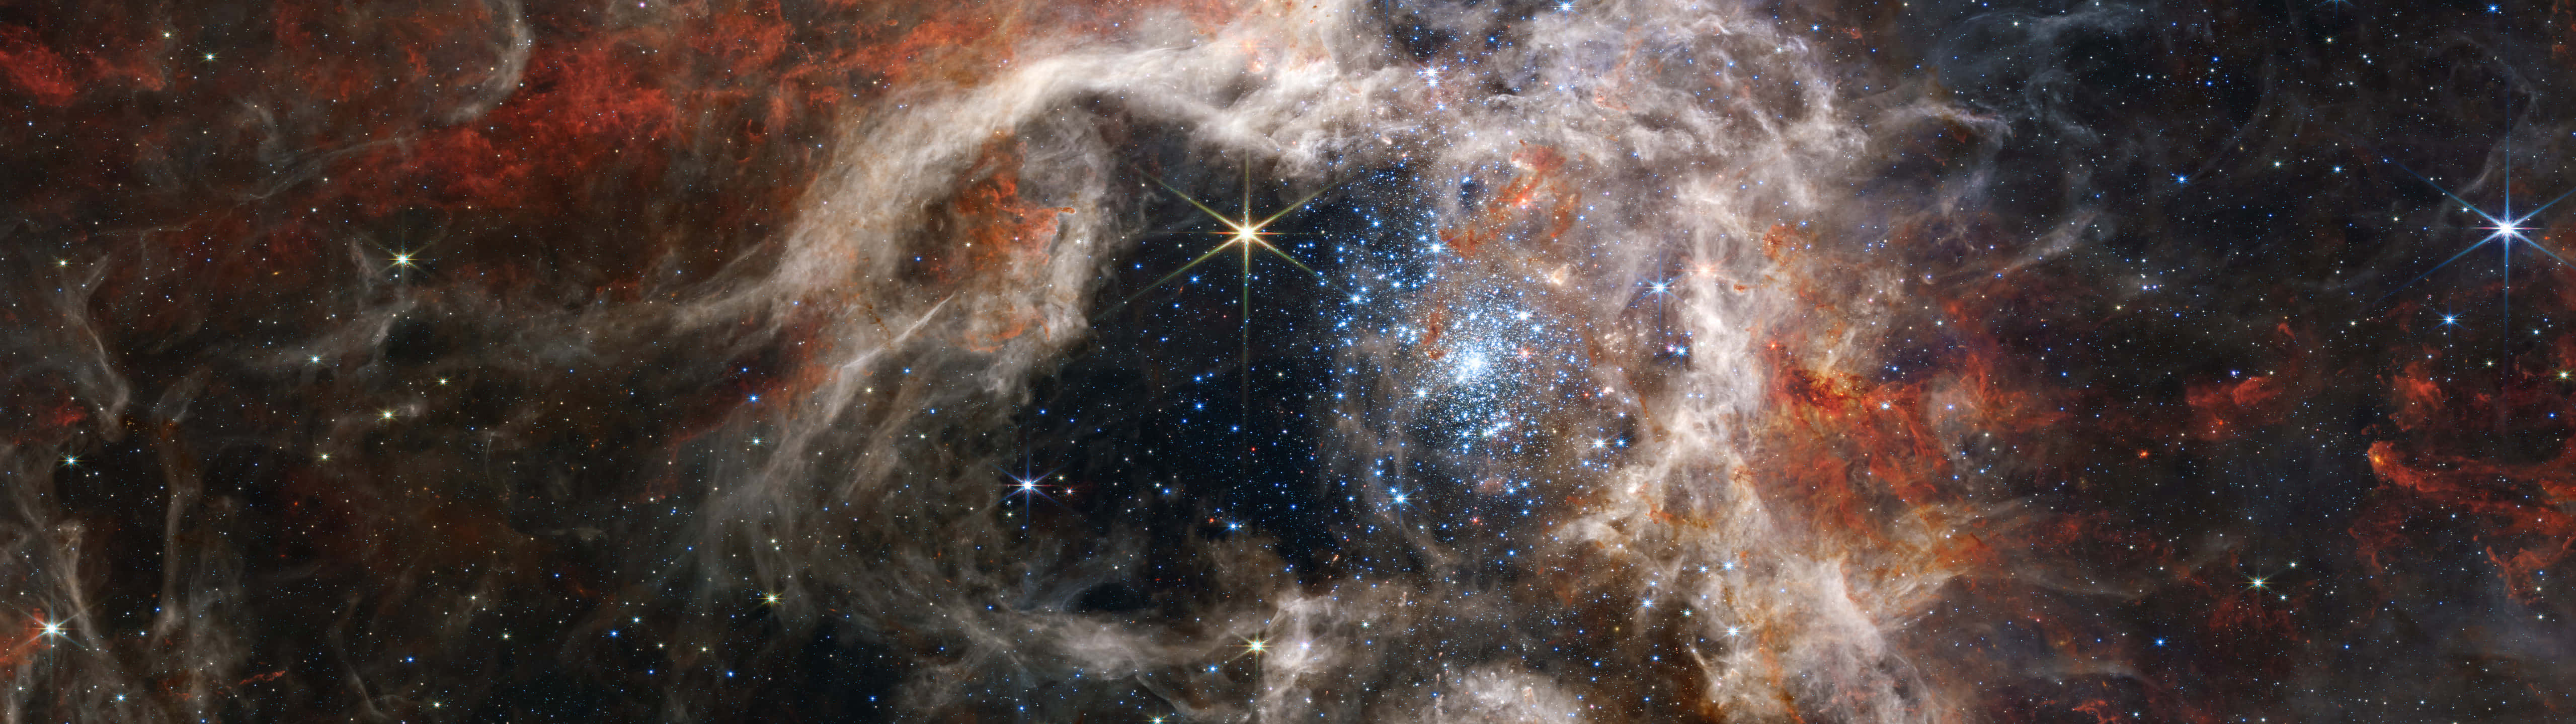 A Space Image Of A Star Cluster Background